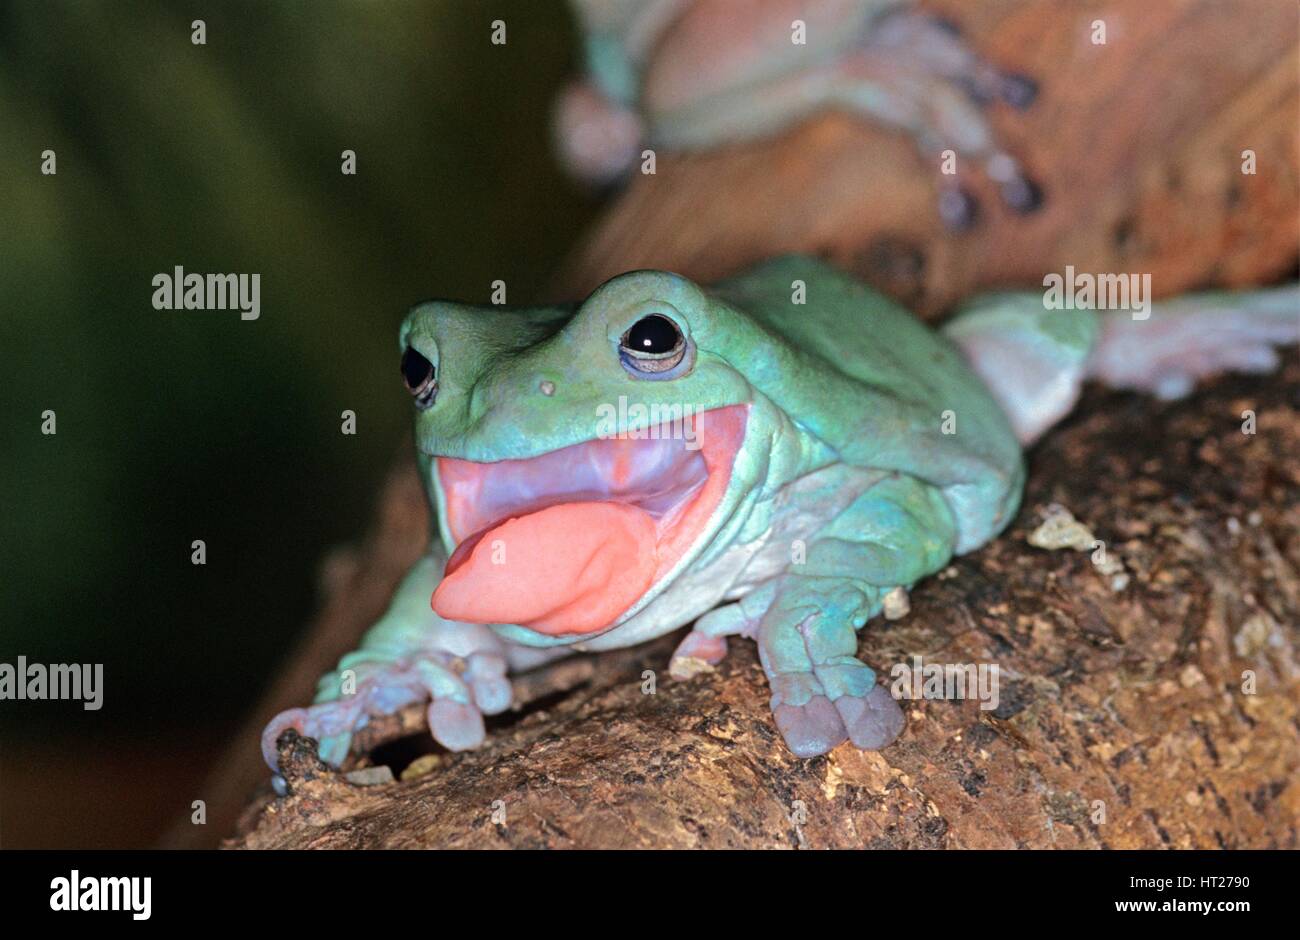 Page 5 - Frog Tongue High Resolution Stock Photography and Images - Alamy